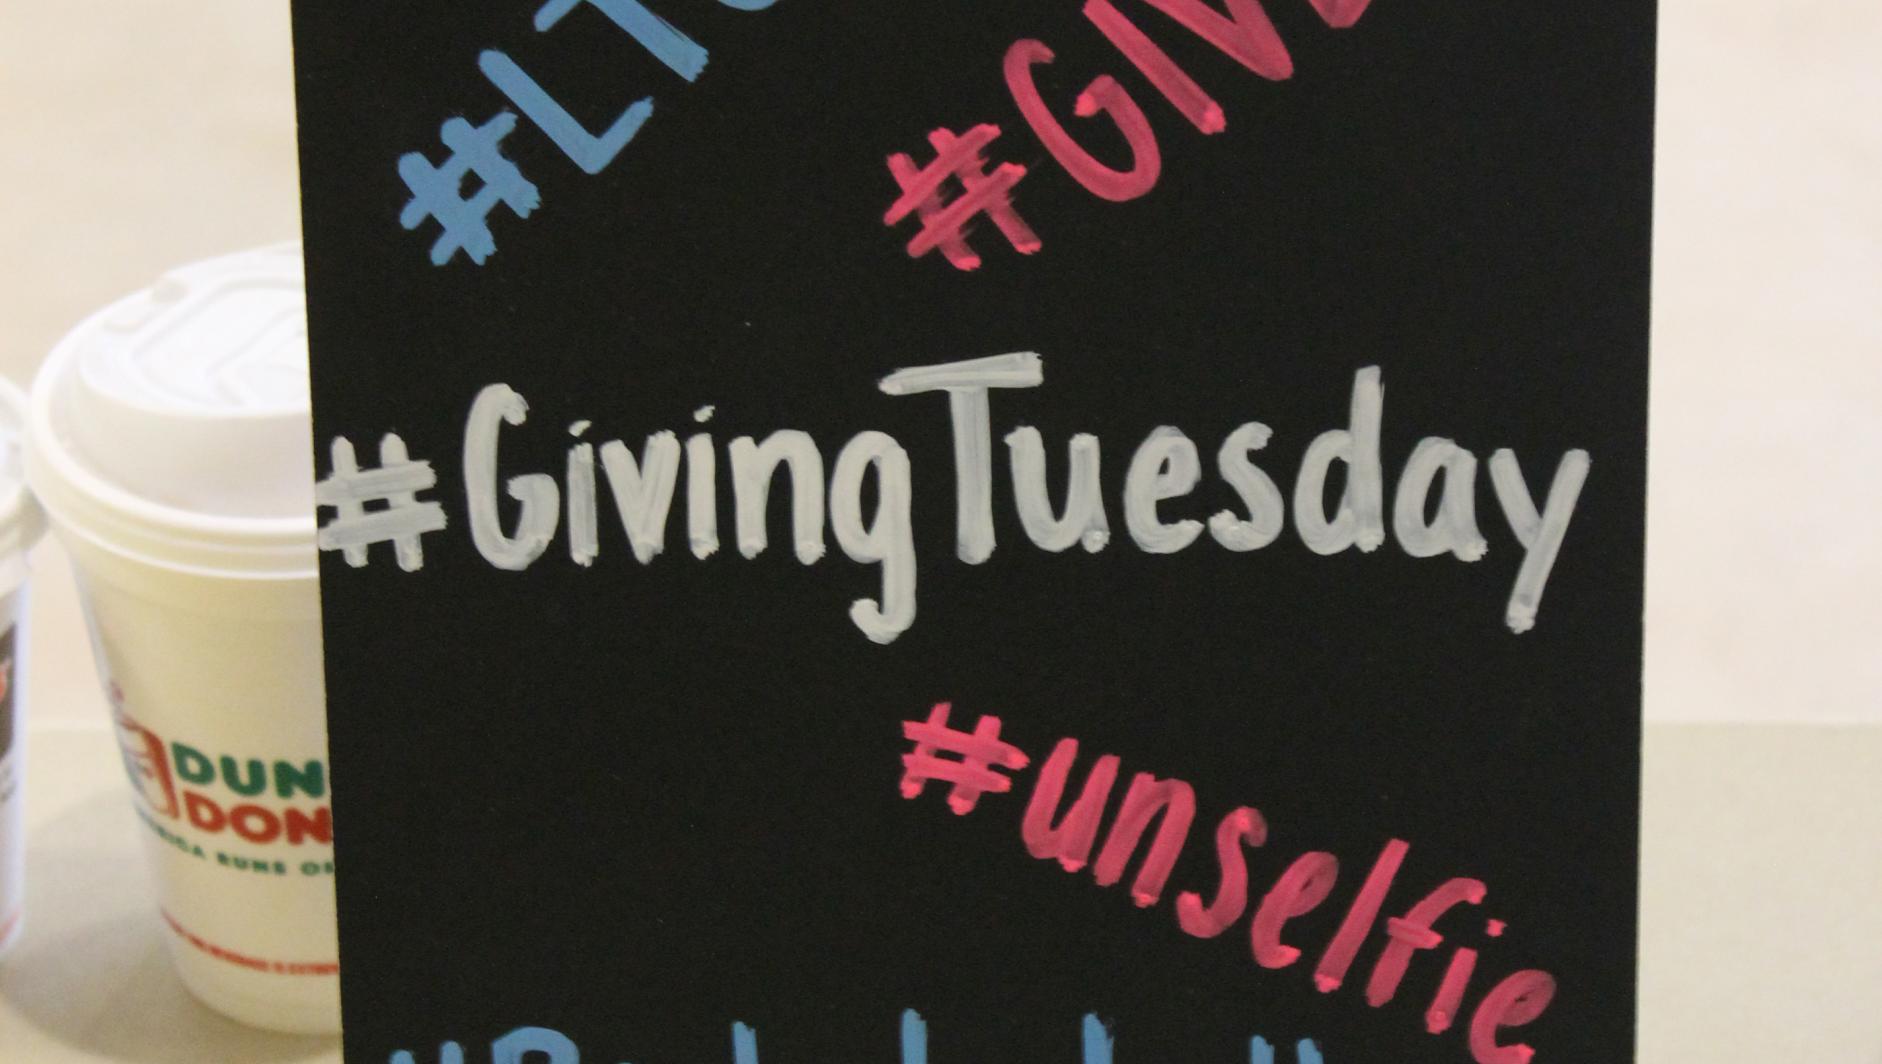 A sign showing hashtags used during the 2015 Giving Tuesday